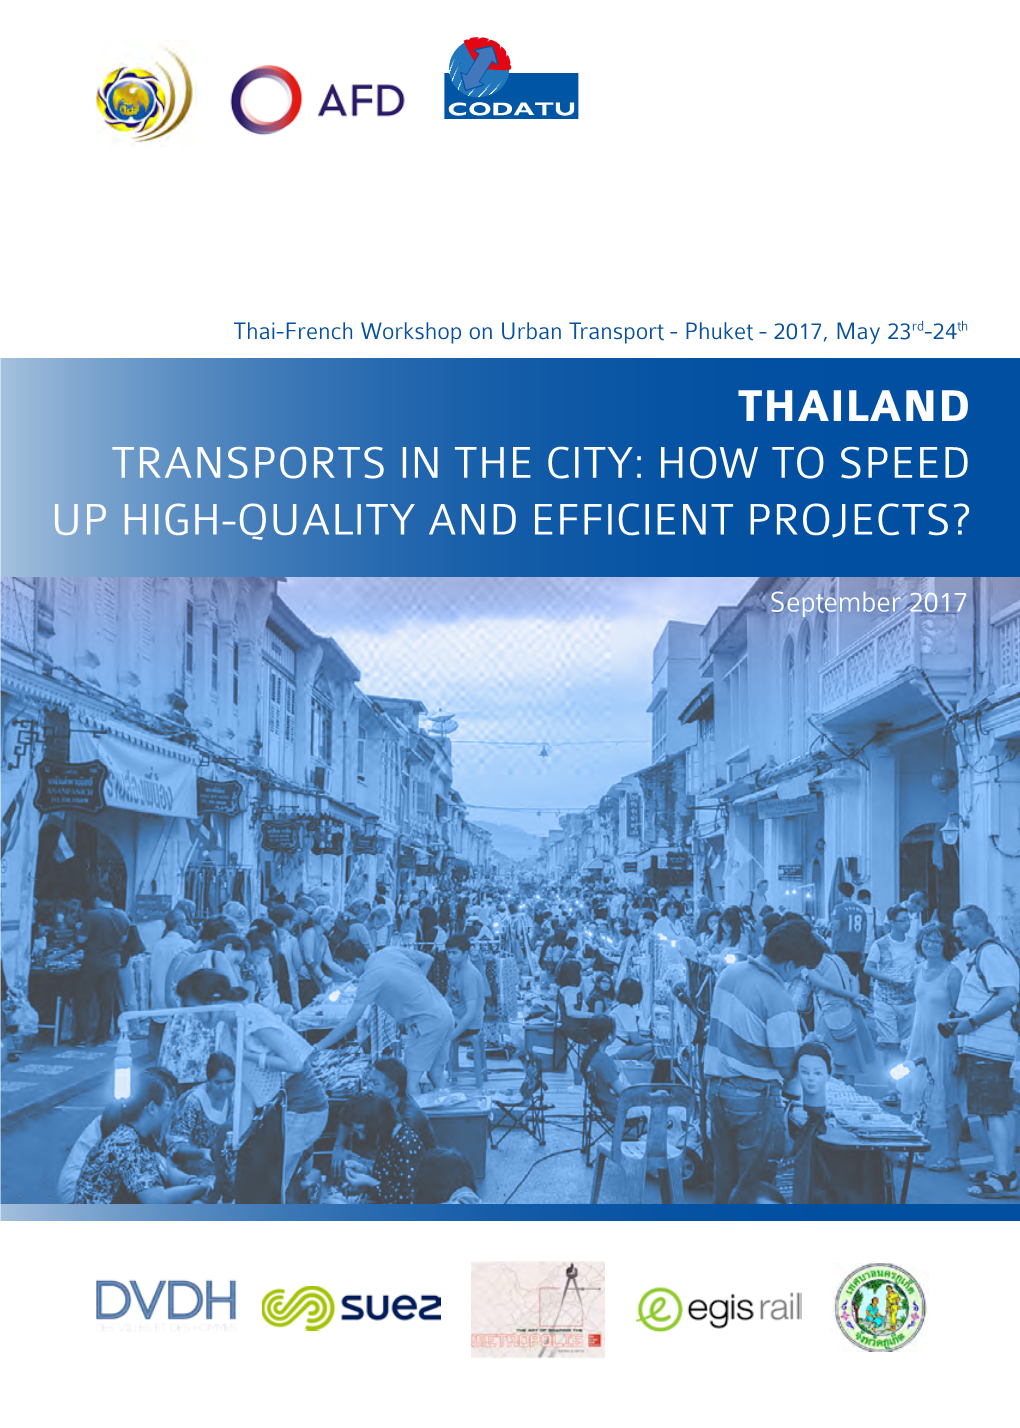 Thailand Transports in the City: How to Speed up High-Quality and Efficient Projects?